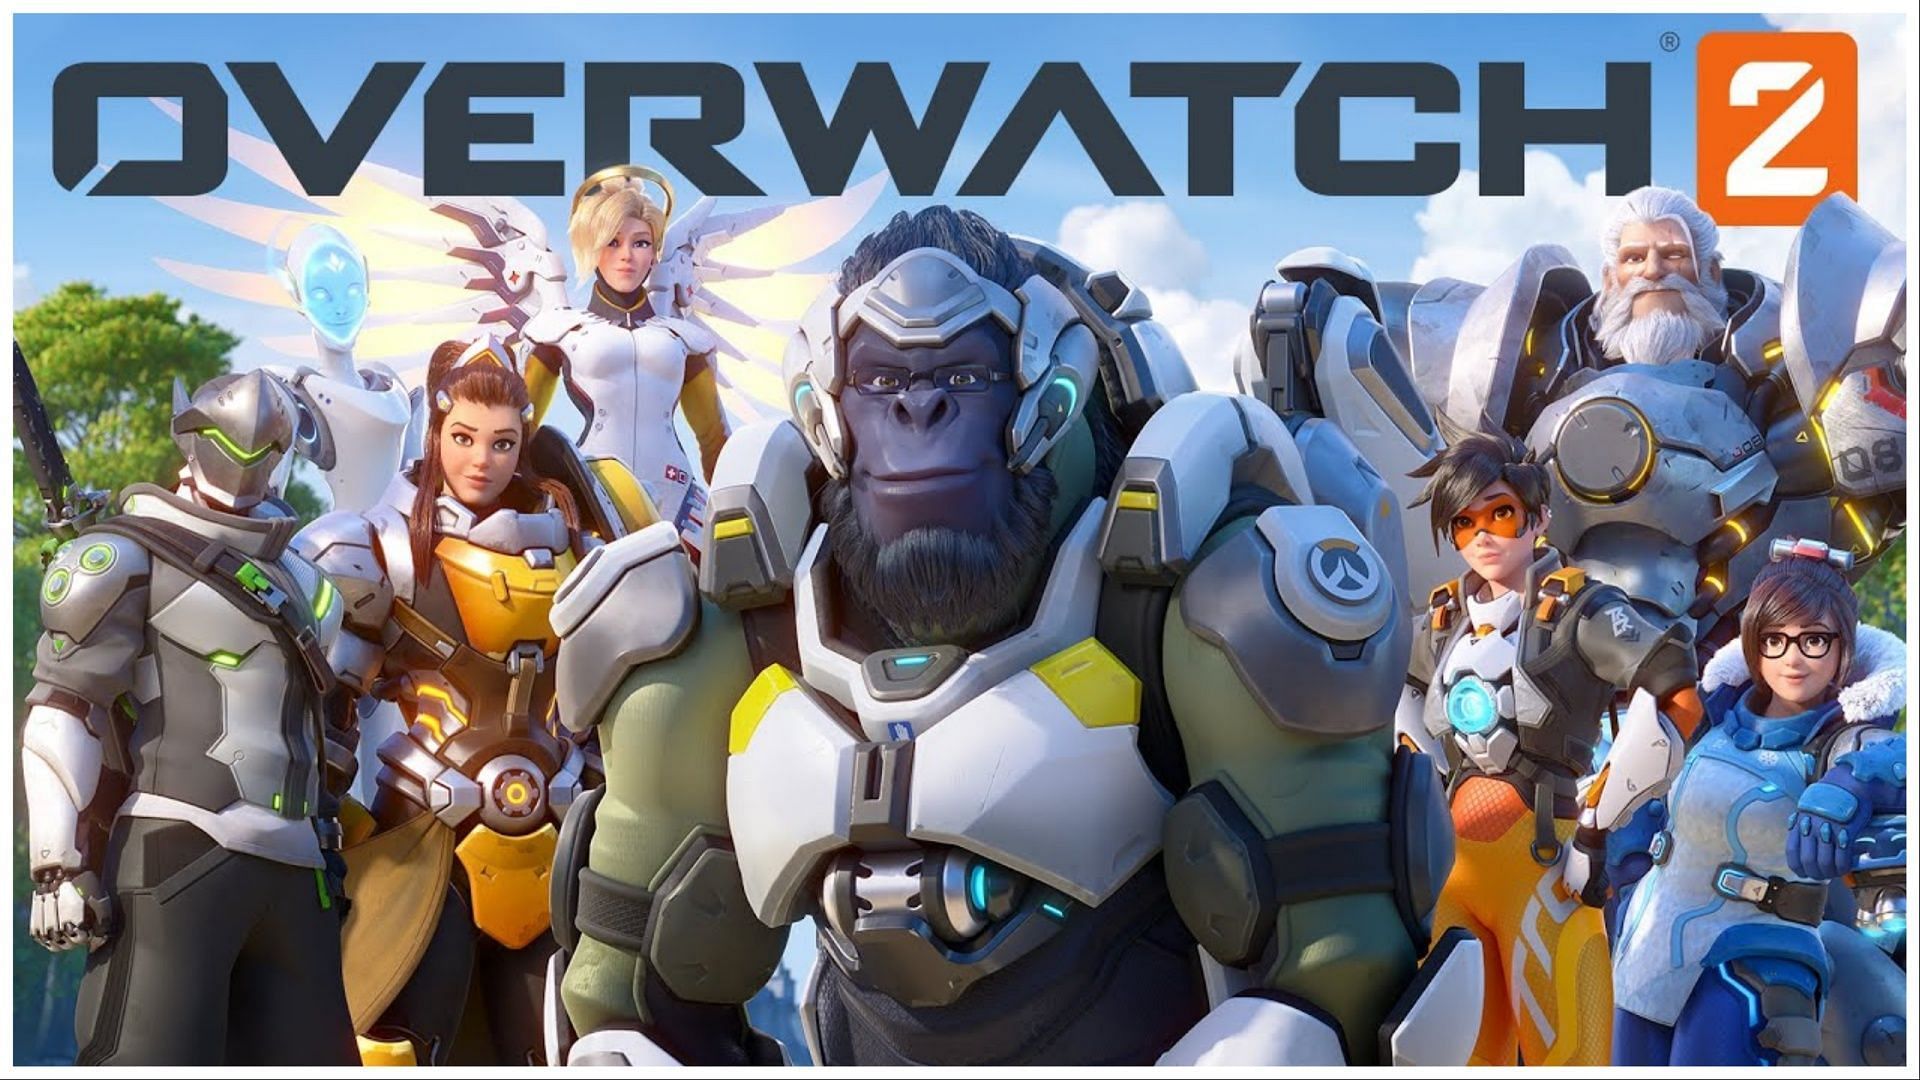 Real names of all Overwatch 2 heroes revealed.